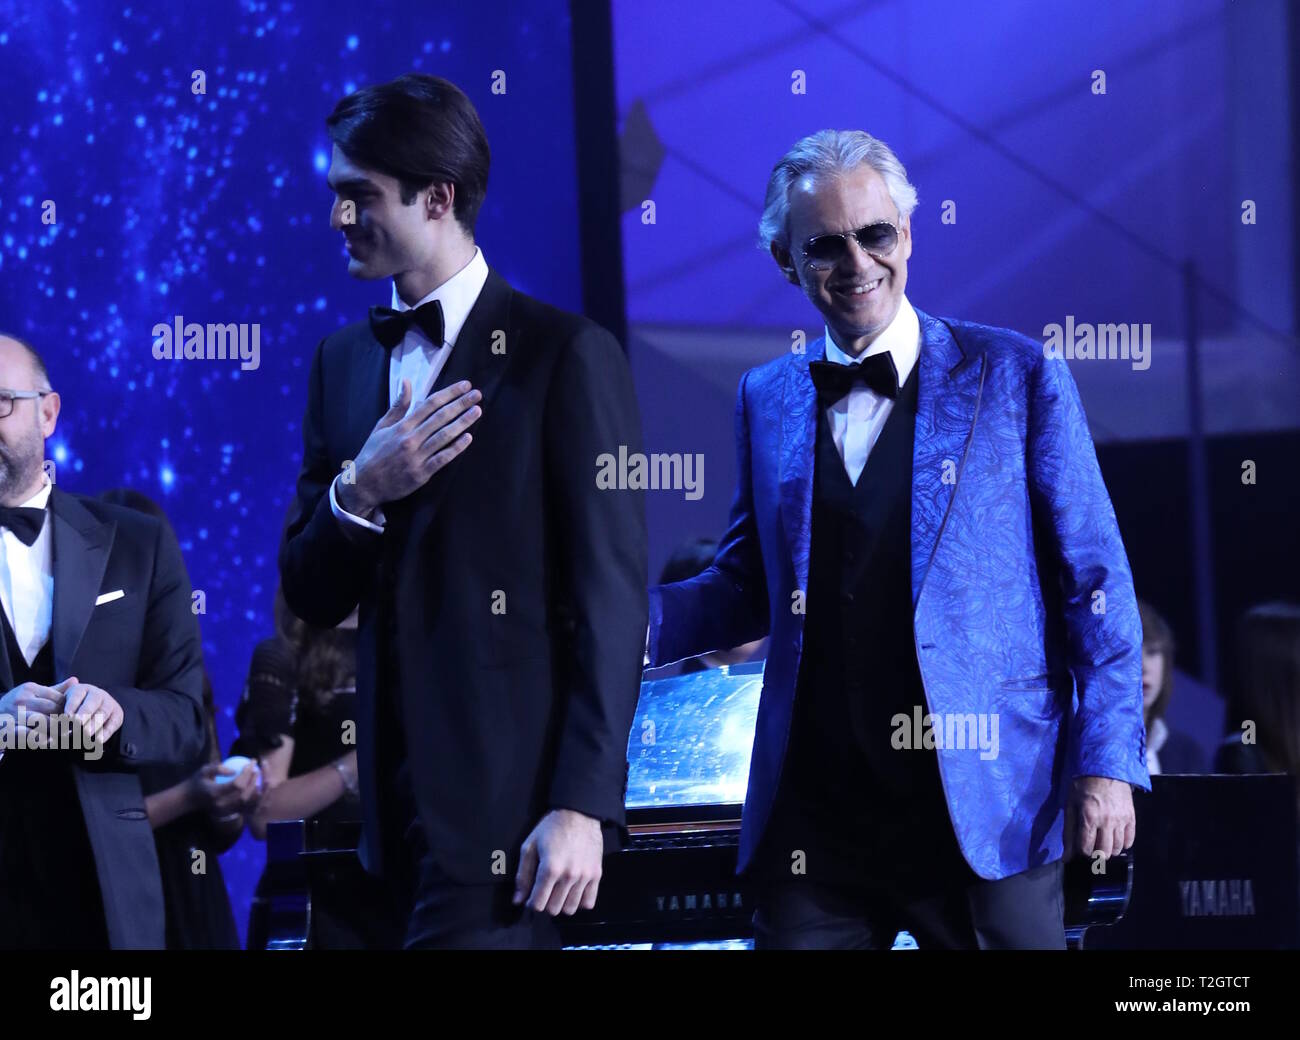 Amos bocelli and matteo bocelli hi-res stock photography and images - Alamy